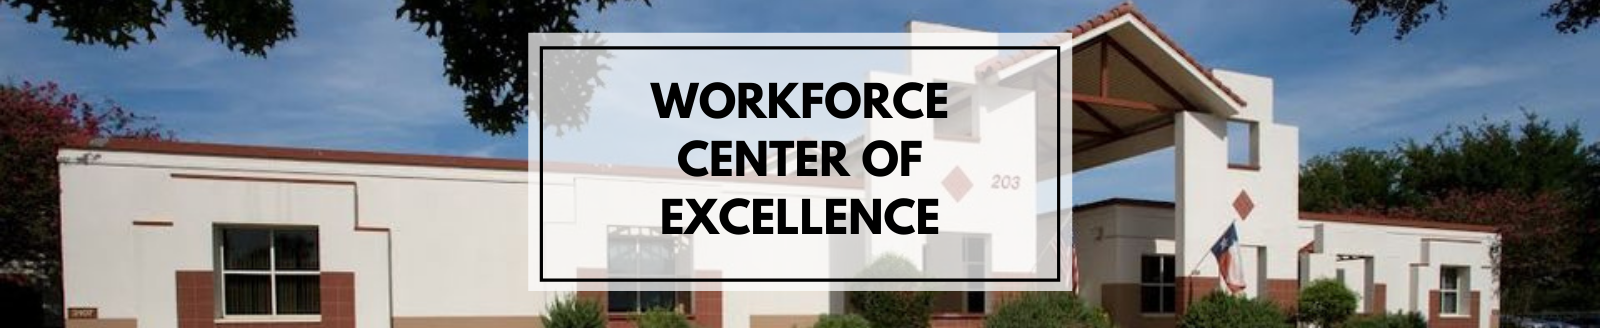 Workforce Center of Excellence.png